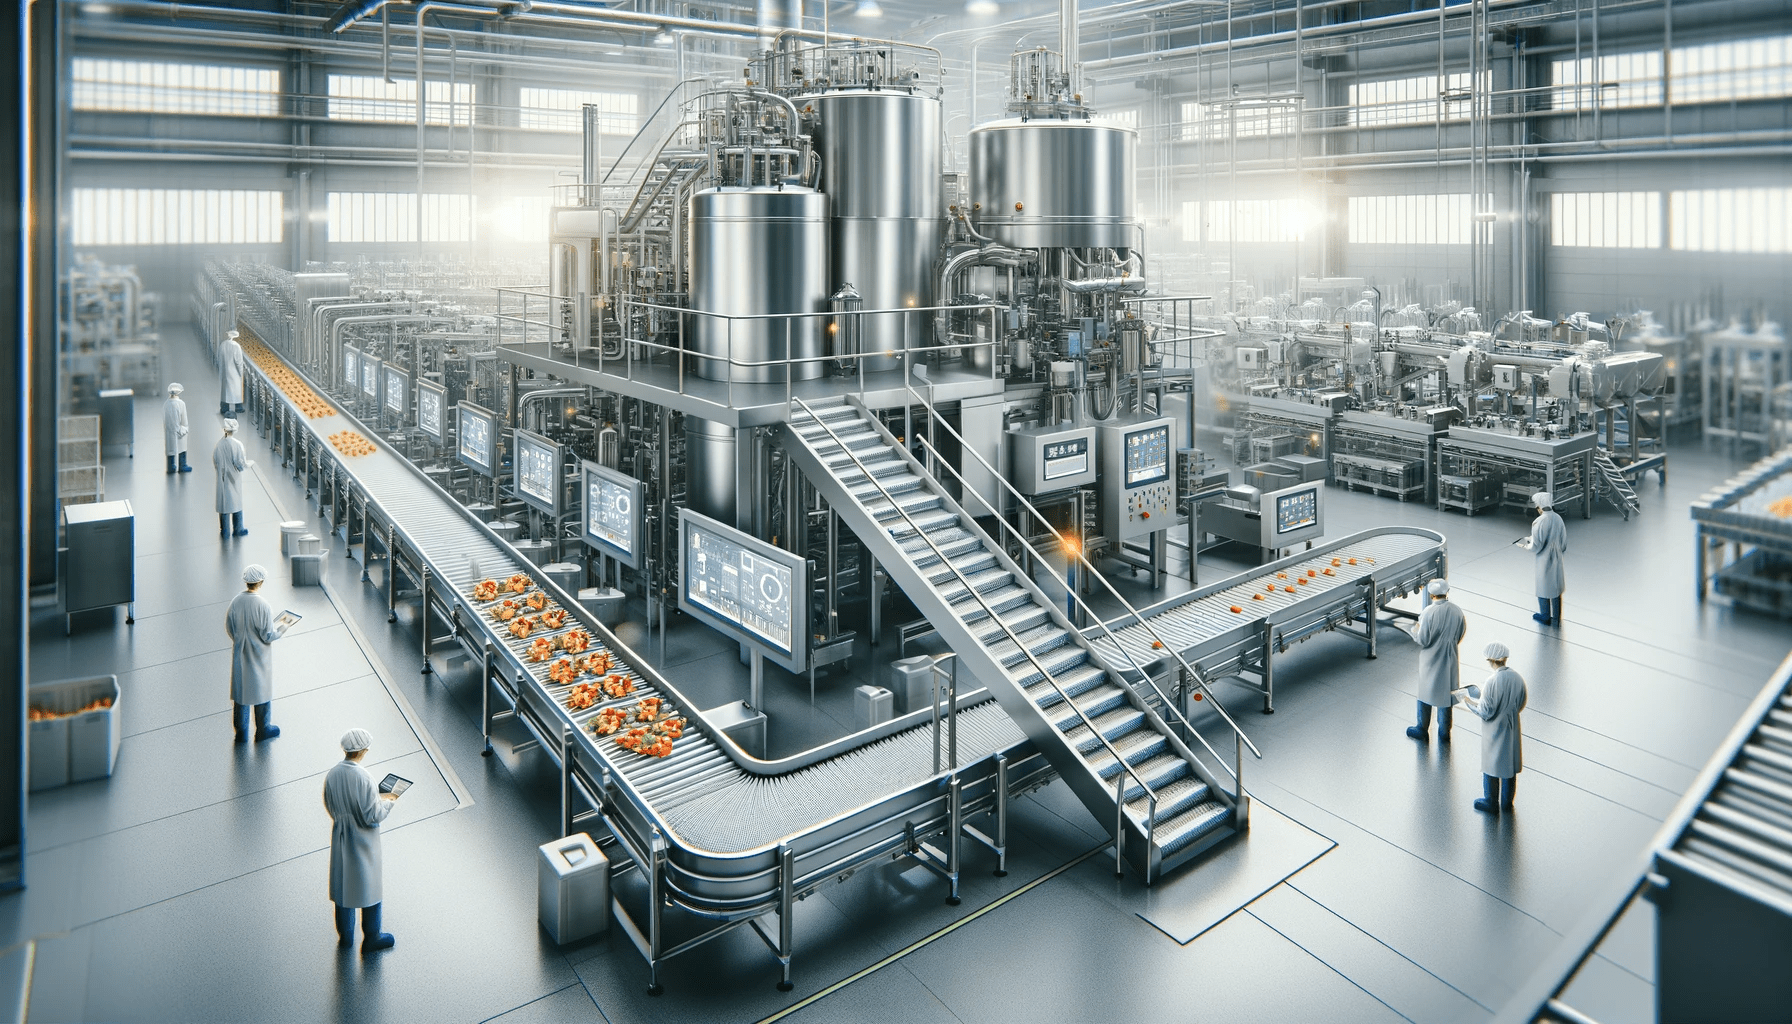 A modern food processing system in an industrial setting. The image should depict a large, stainless steel machinery with conveyor belts